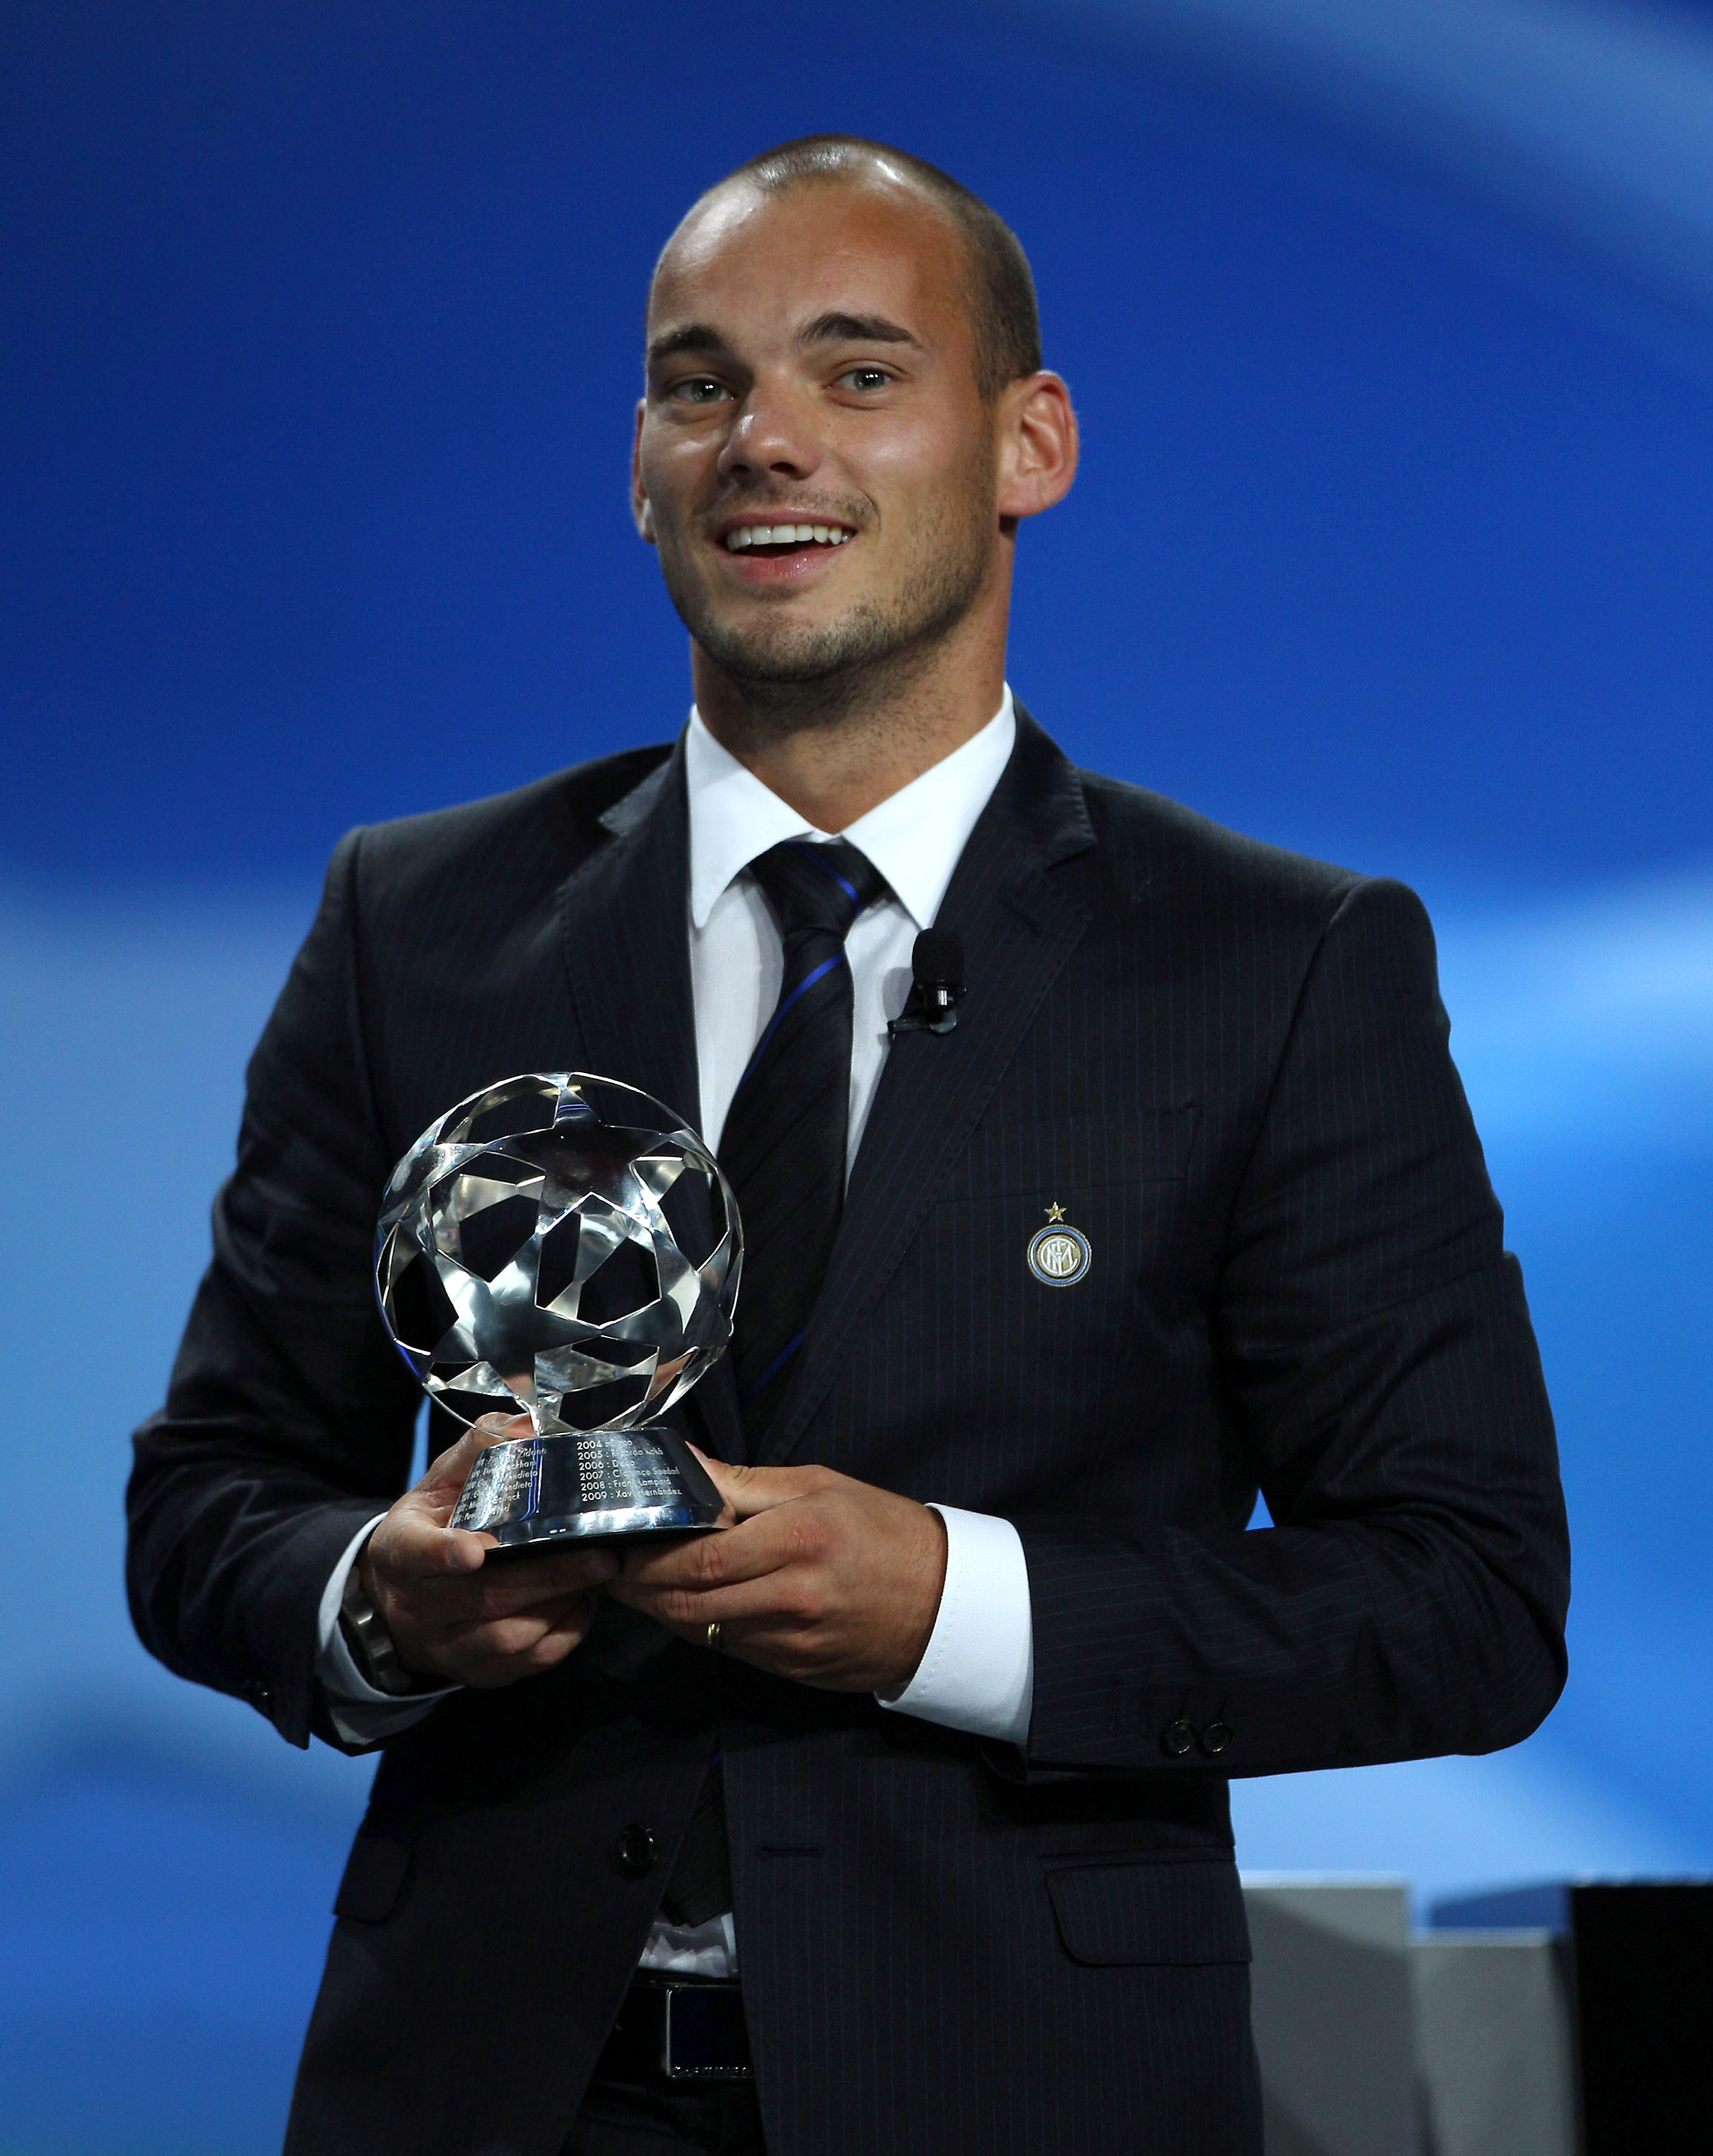 MONACO - AUGUST 26:  Wesley Sneijder of Inter Milan receives the UEFA midfielder of the year trophy during the UEFA Champions League Group Stage draw at the Grimaldi Forum on August 26, 2010 in Monaco, Monaco.  (Photo by Michael Steele/Getty Images)